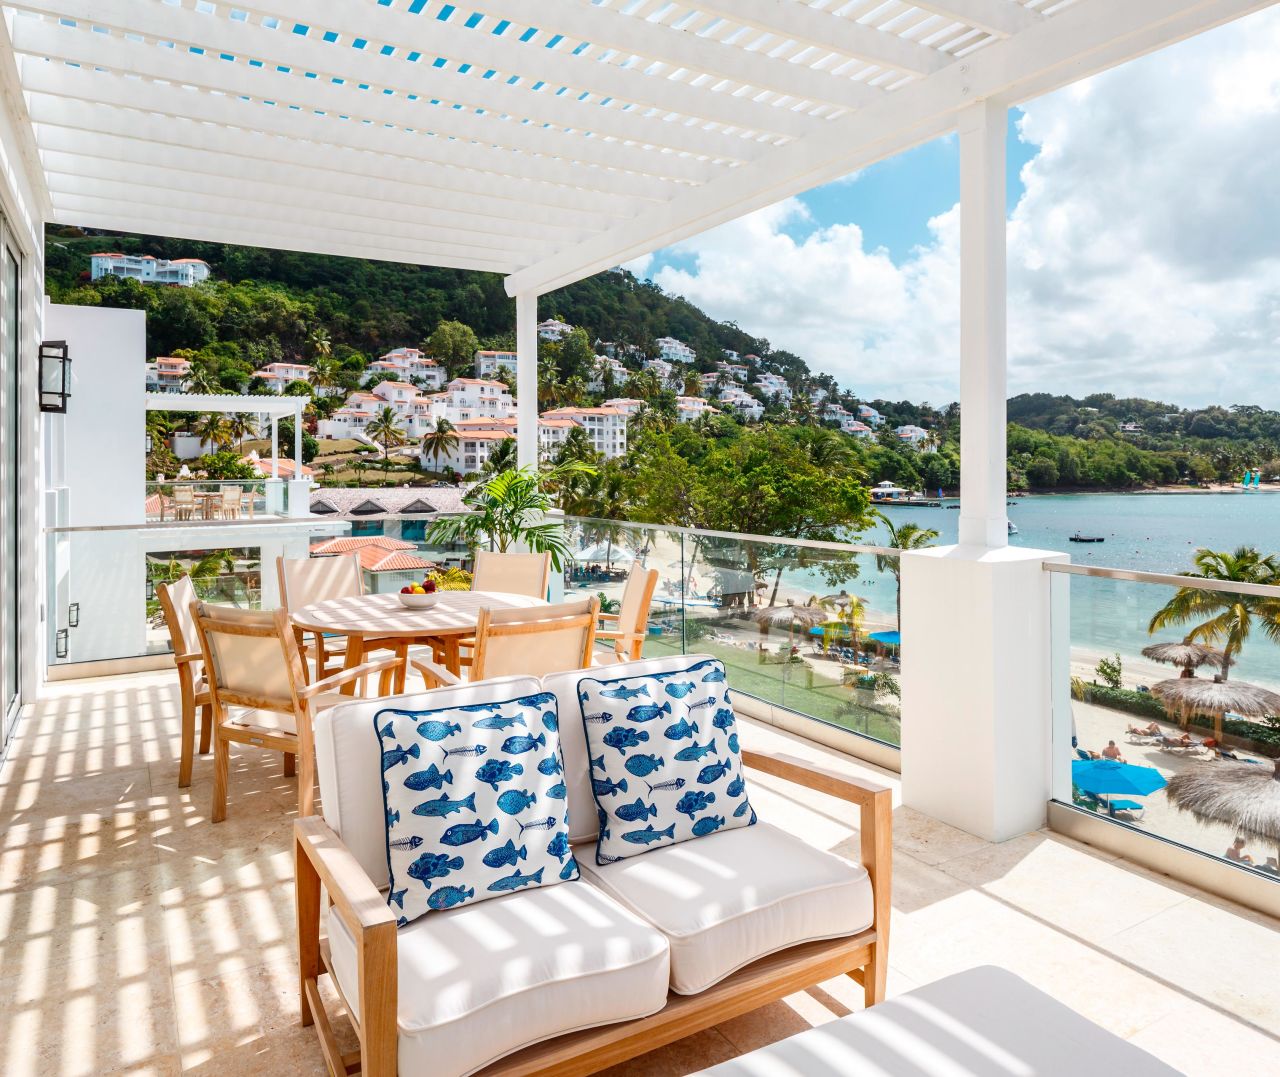 Windjammer Landing in St. Lucia is offering 40% off room rates.